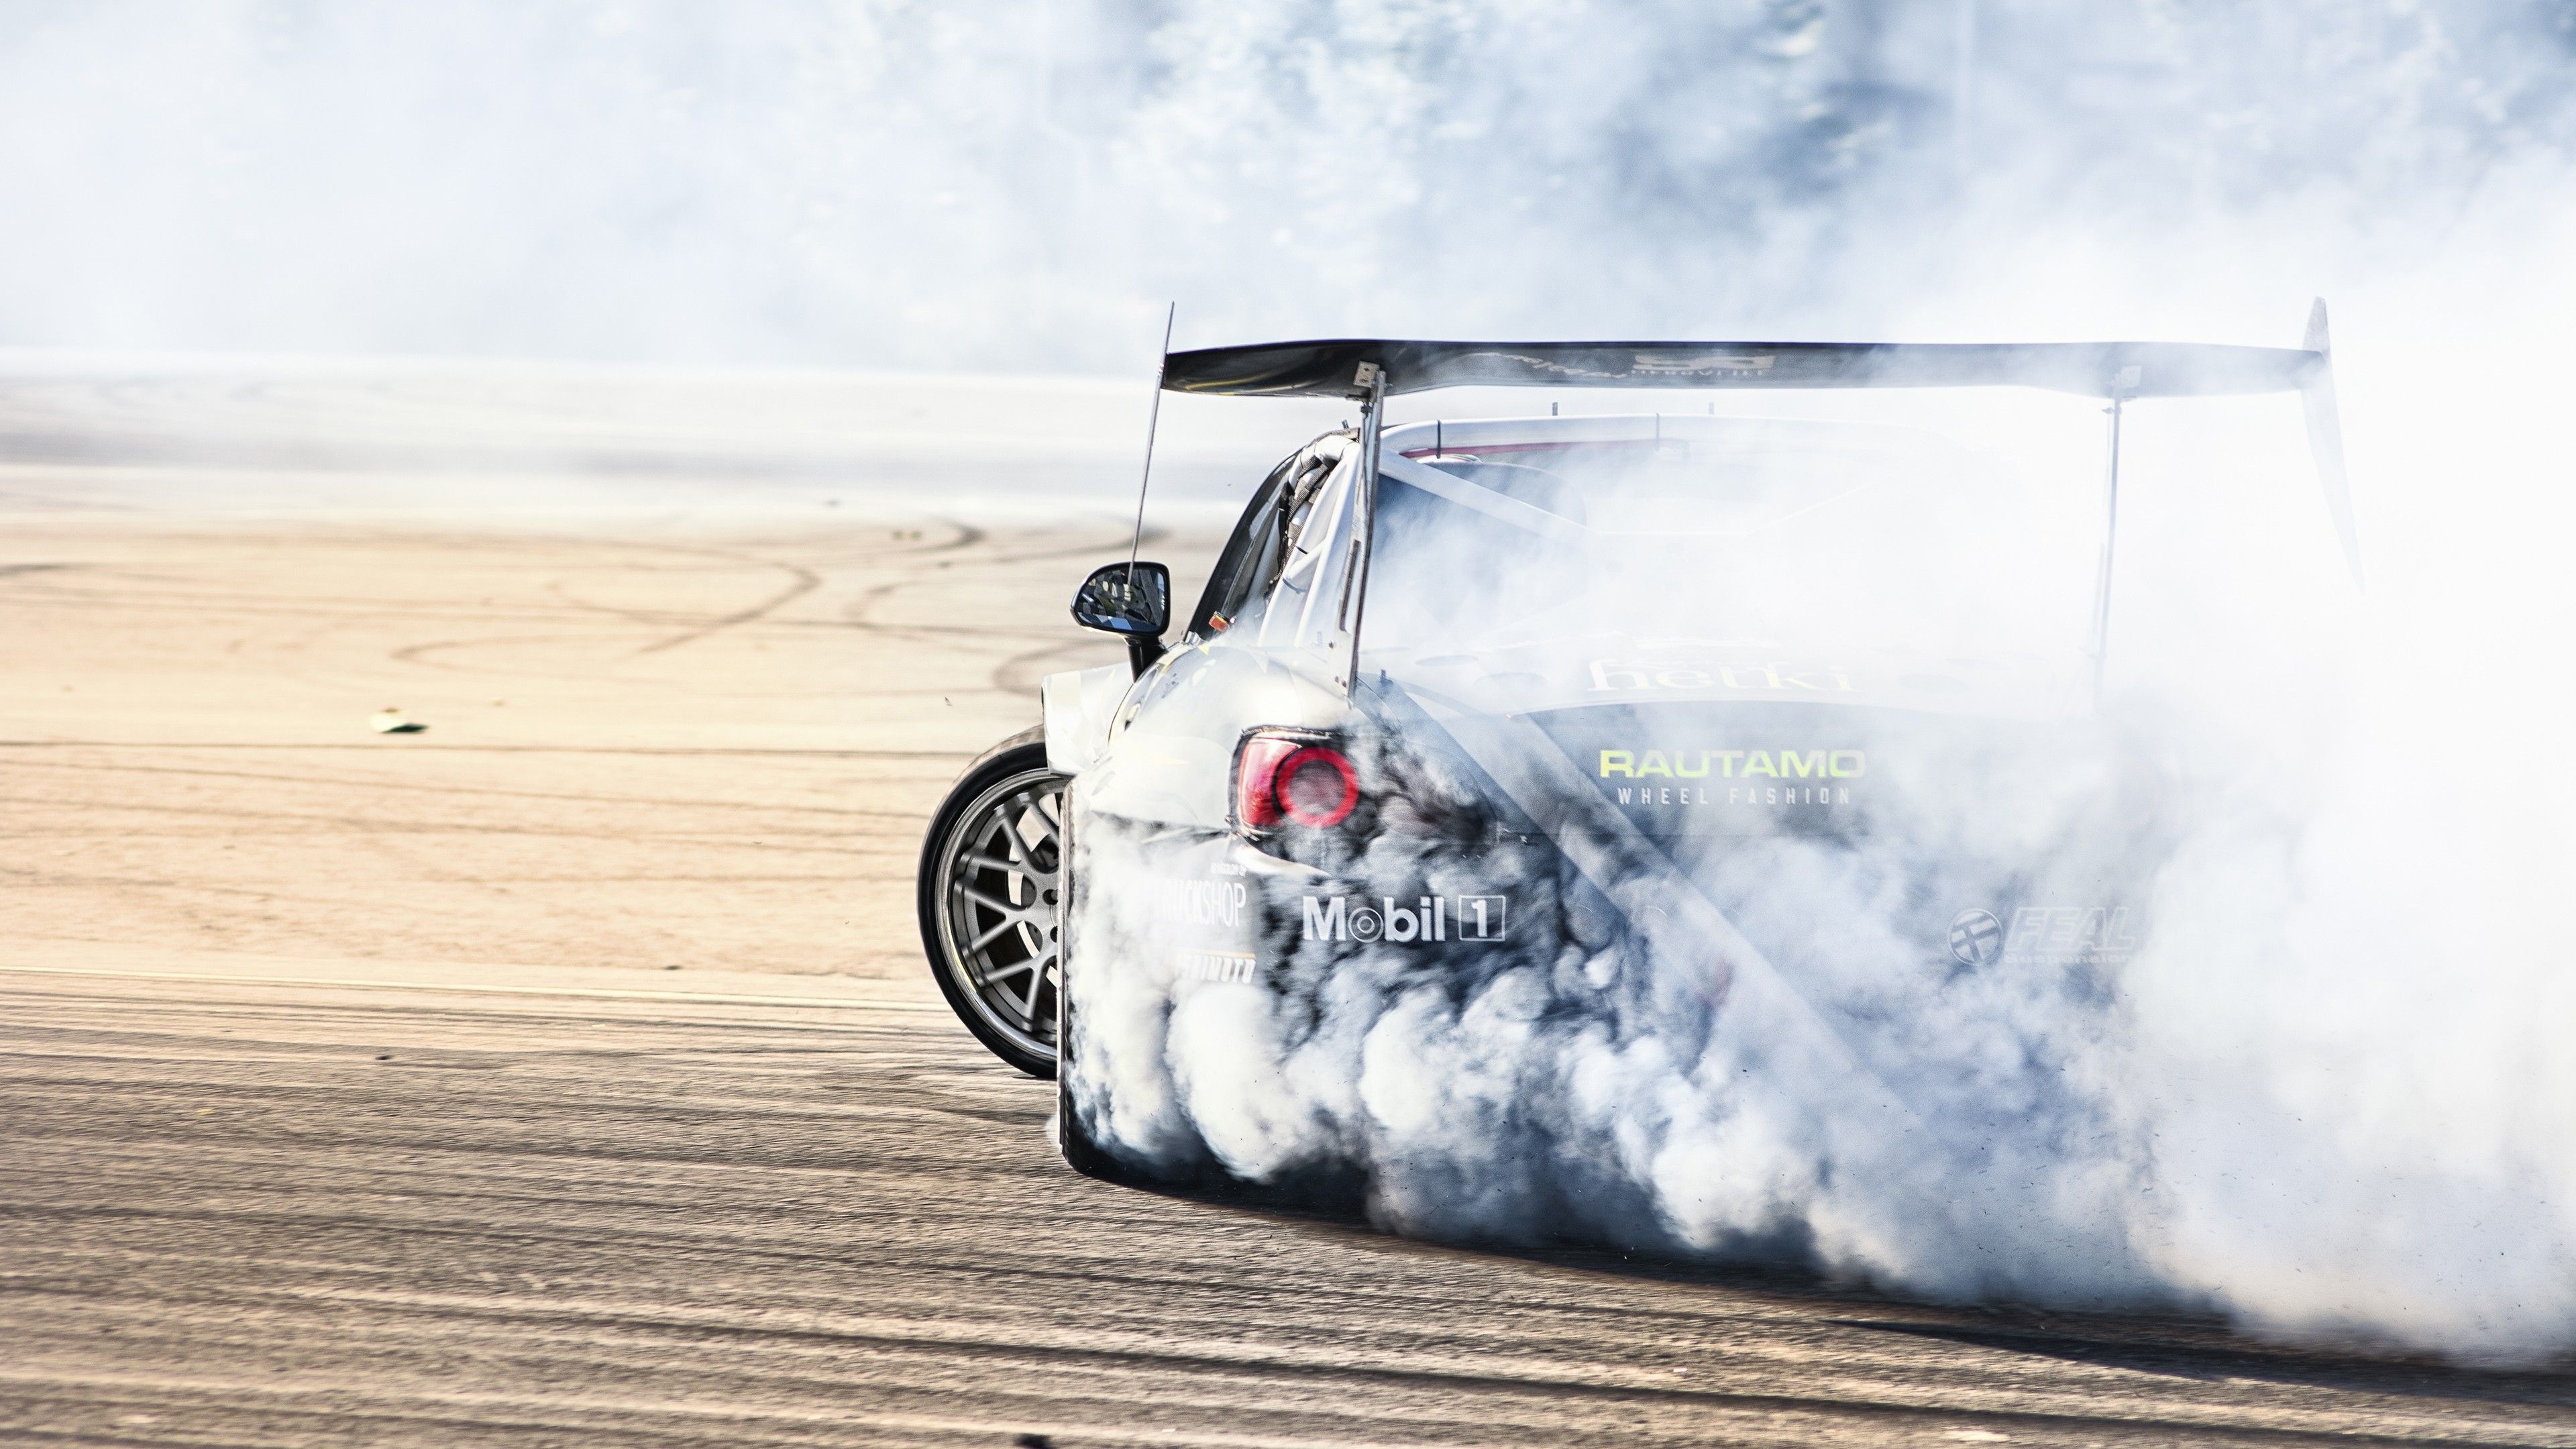 Drifting: Movil 1 racing oil, Competitive motorsport, Extreme driving, Racing track. 3840x2160 4K Background.